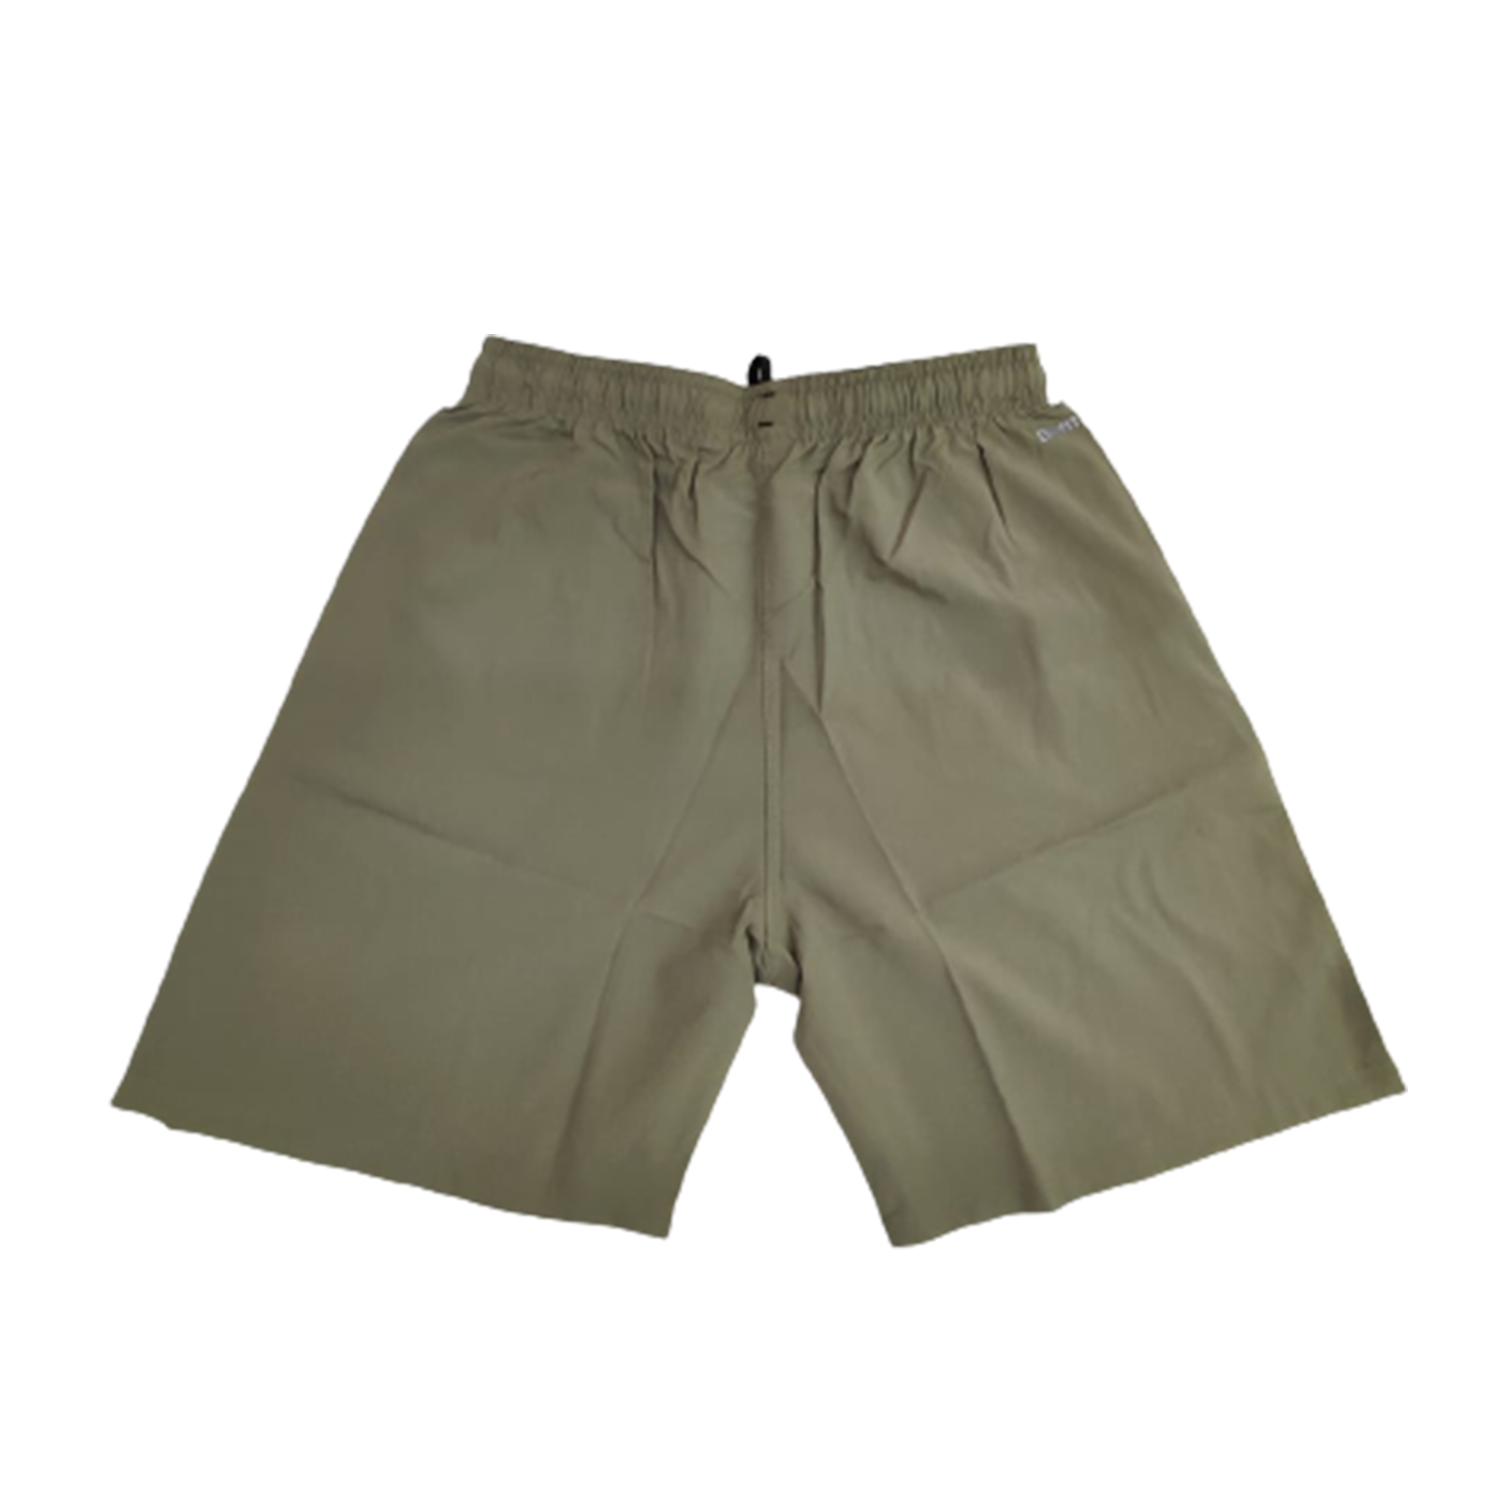 Plain Shorts (4 Pieces in 1 Pkt )